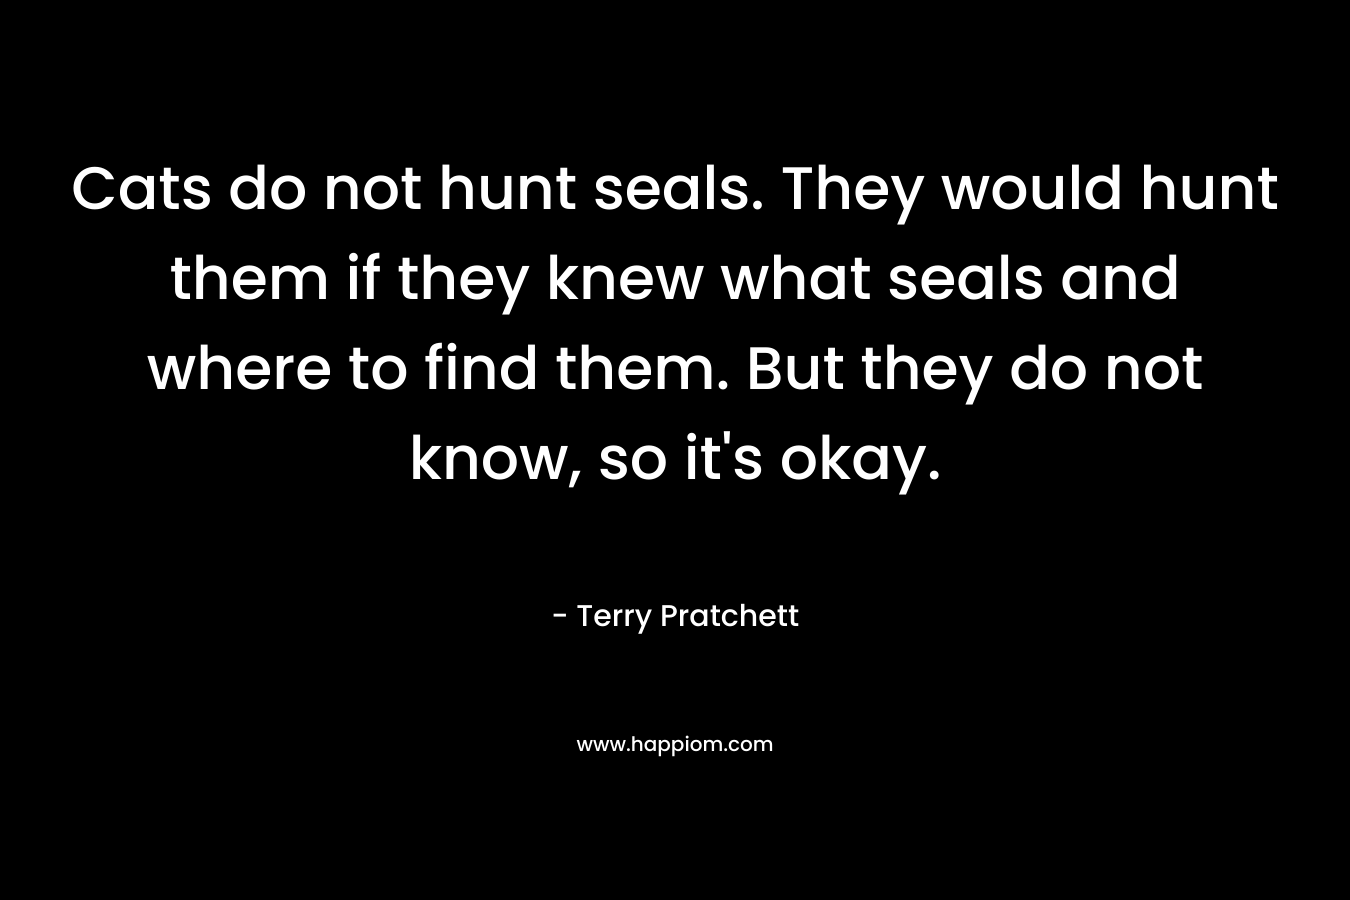 Cats do not hunt seals. They would hunt them if they knew what seals and where to find them. But they do not know, so it’s okay. – Terry Pratchett